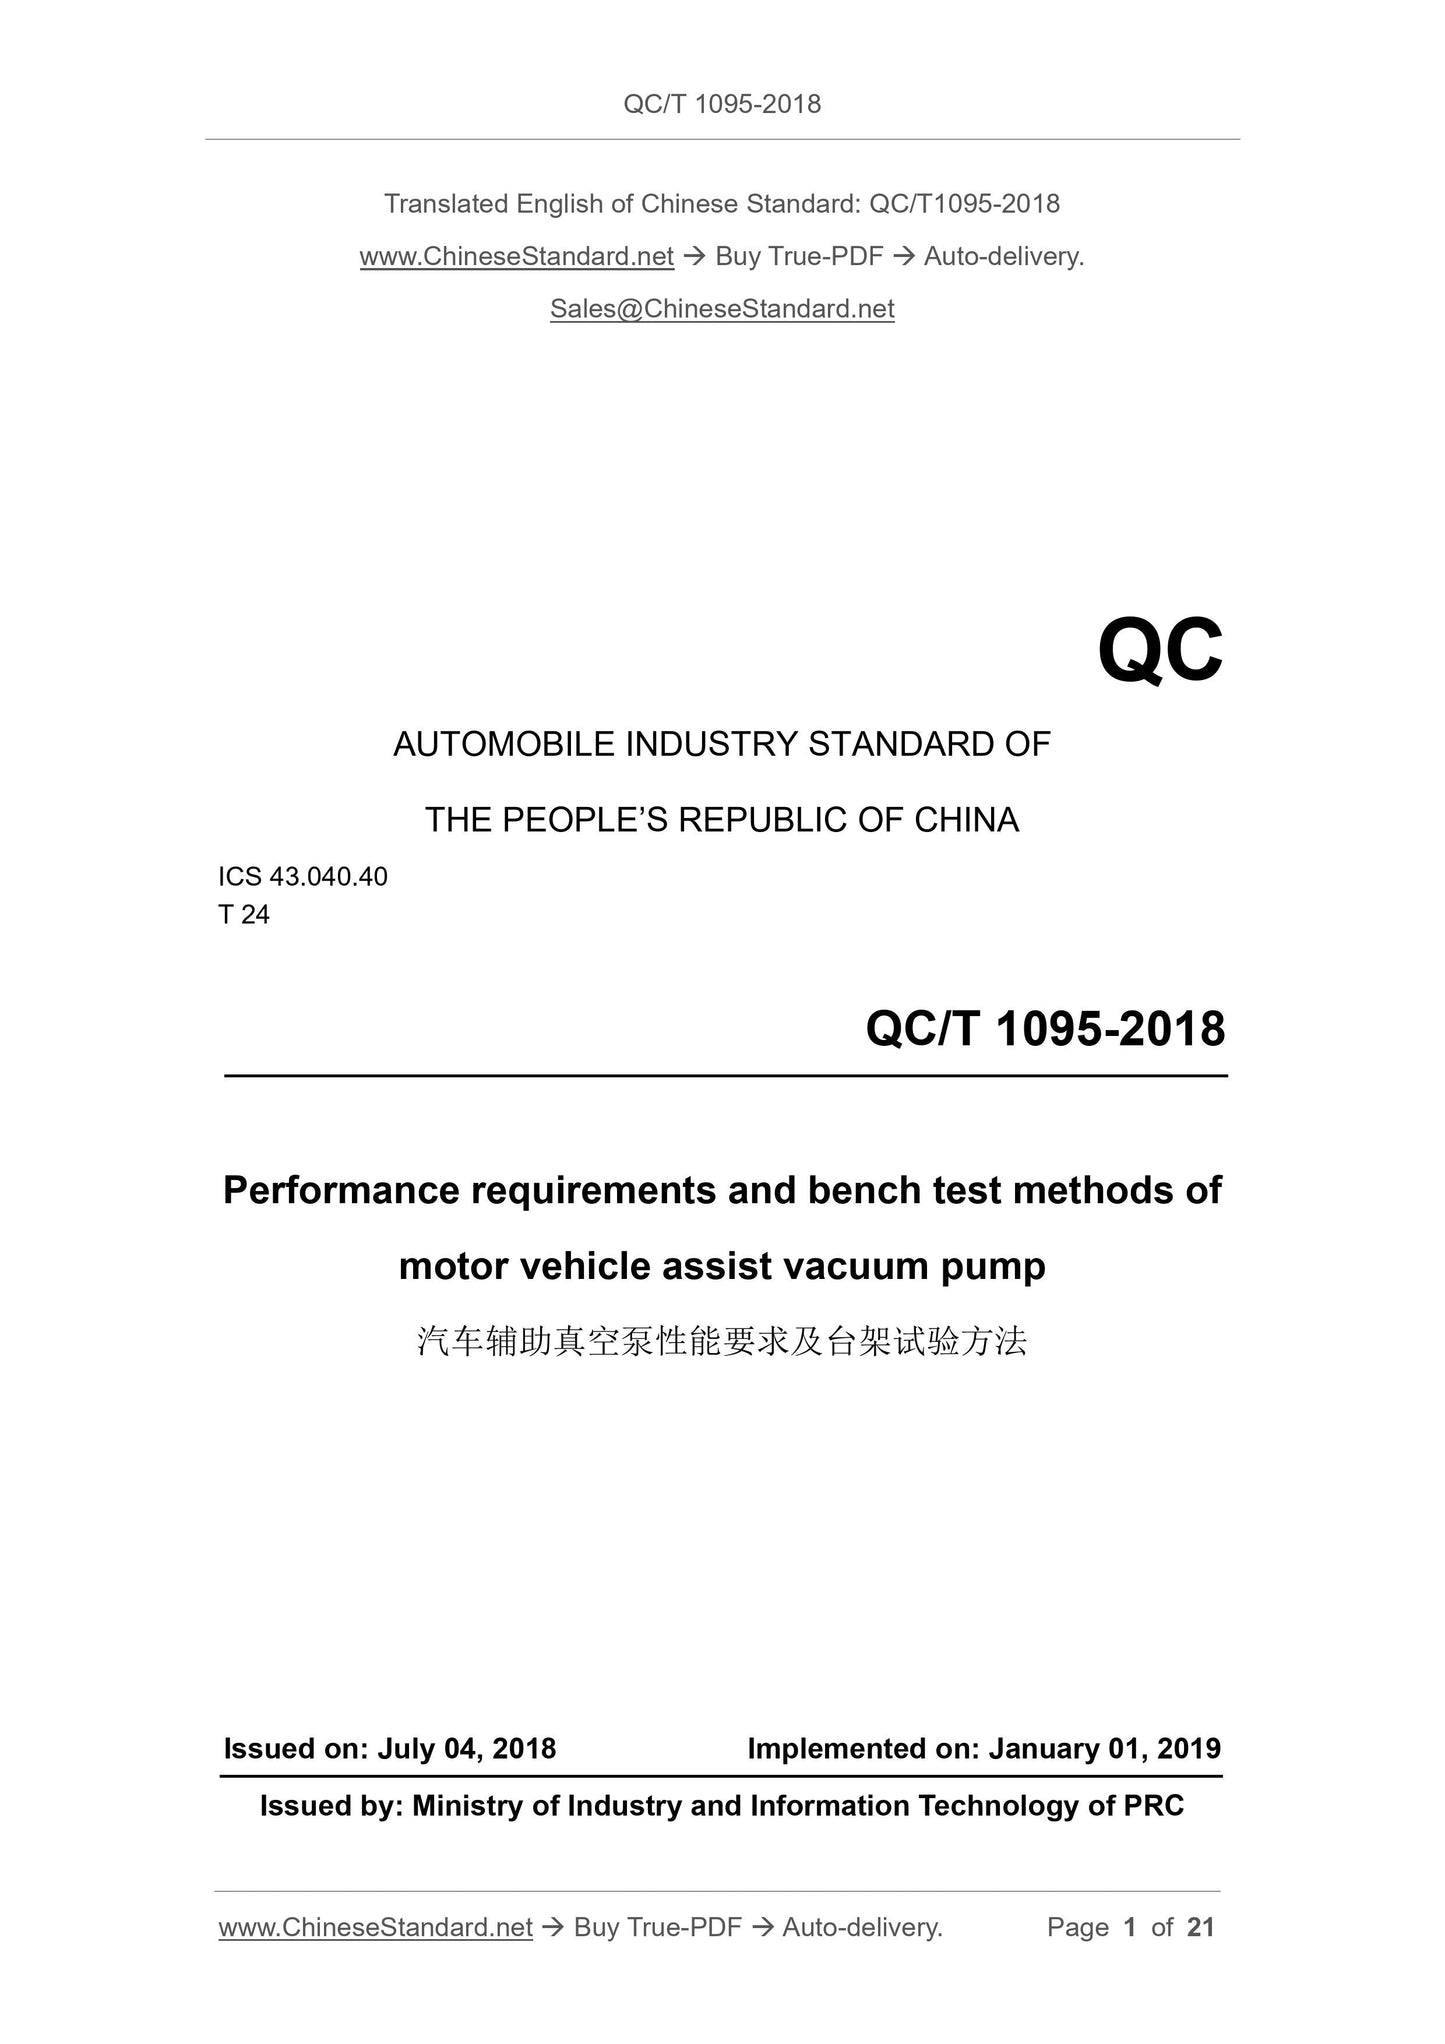 QC/T 1095-2018 Page 1